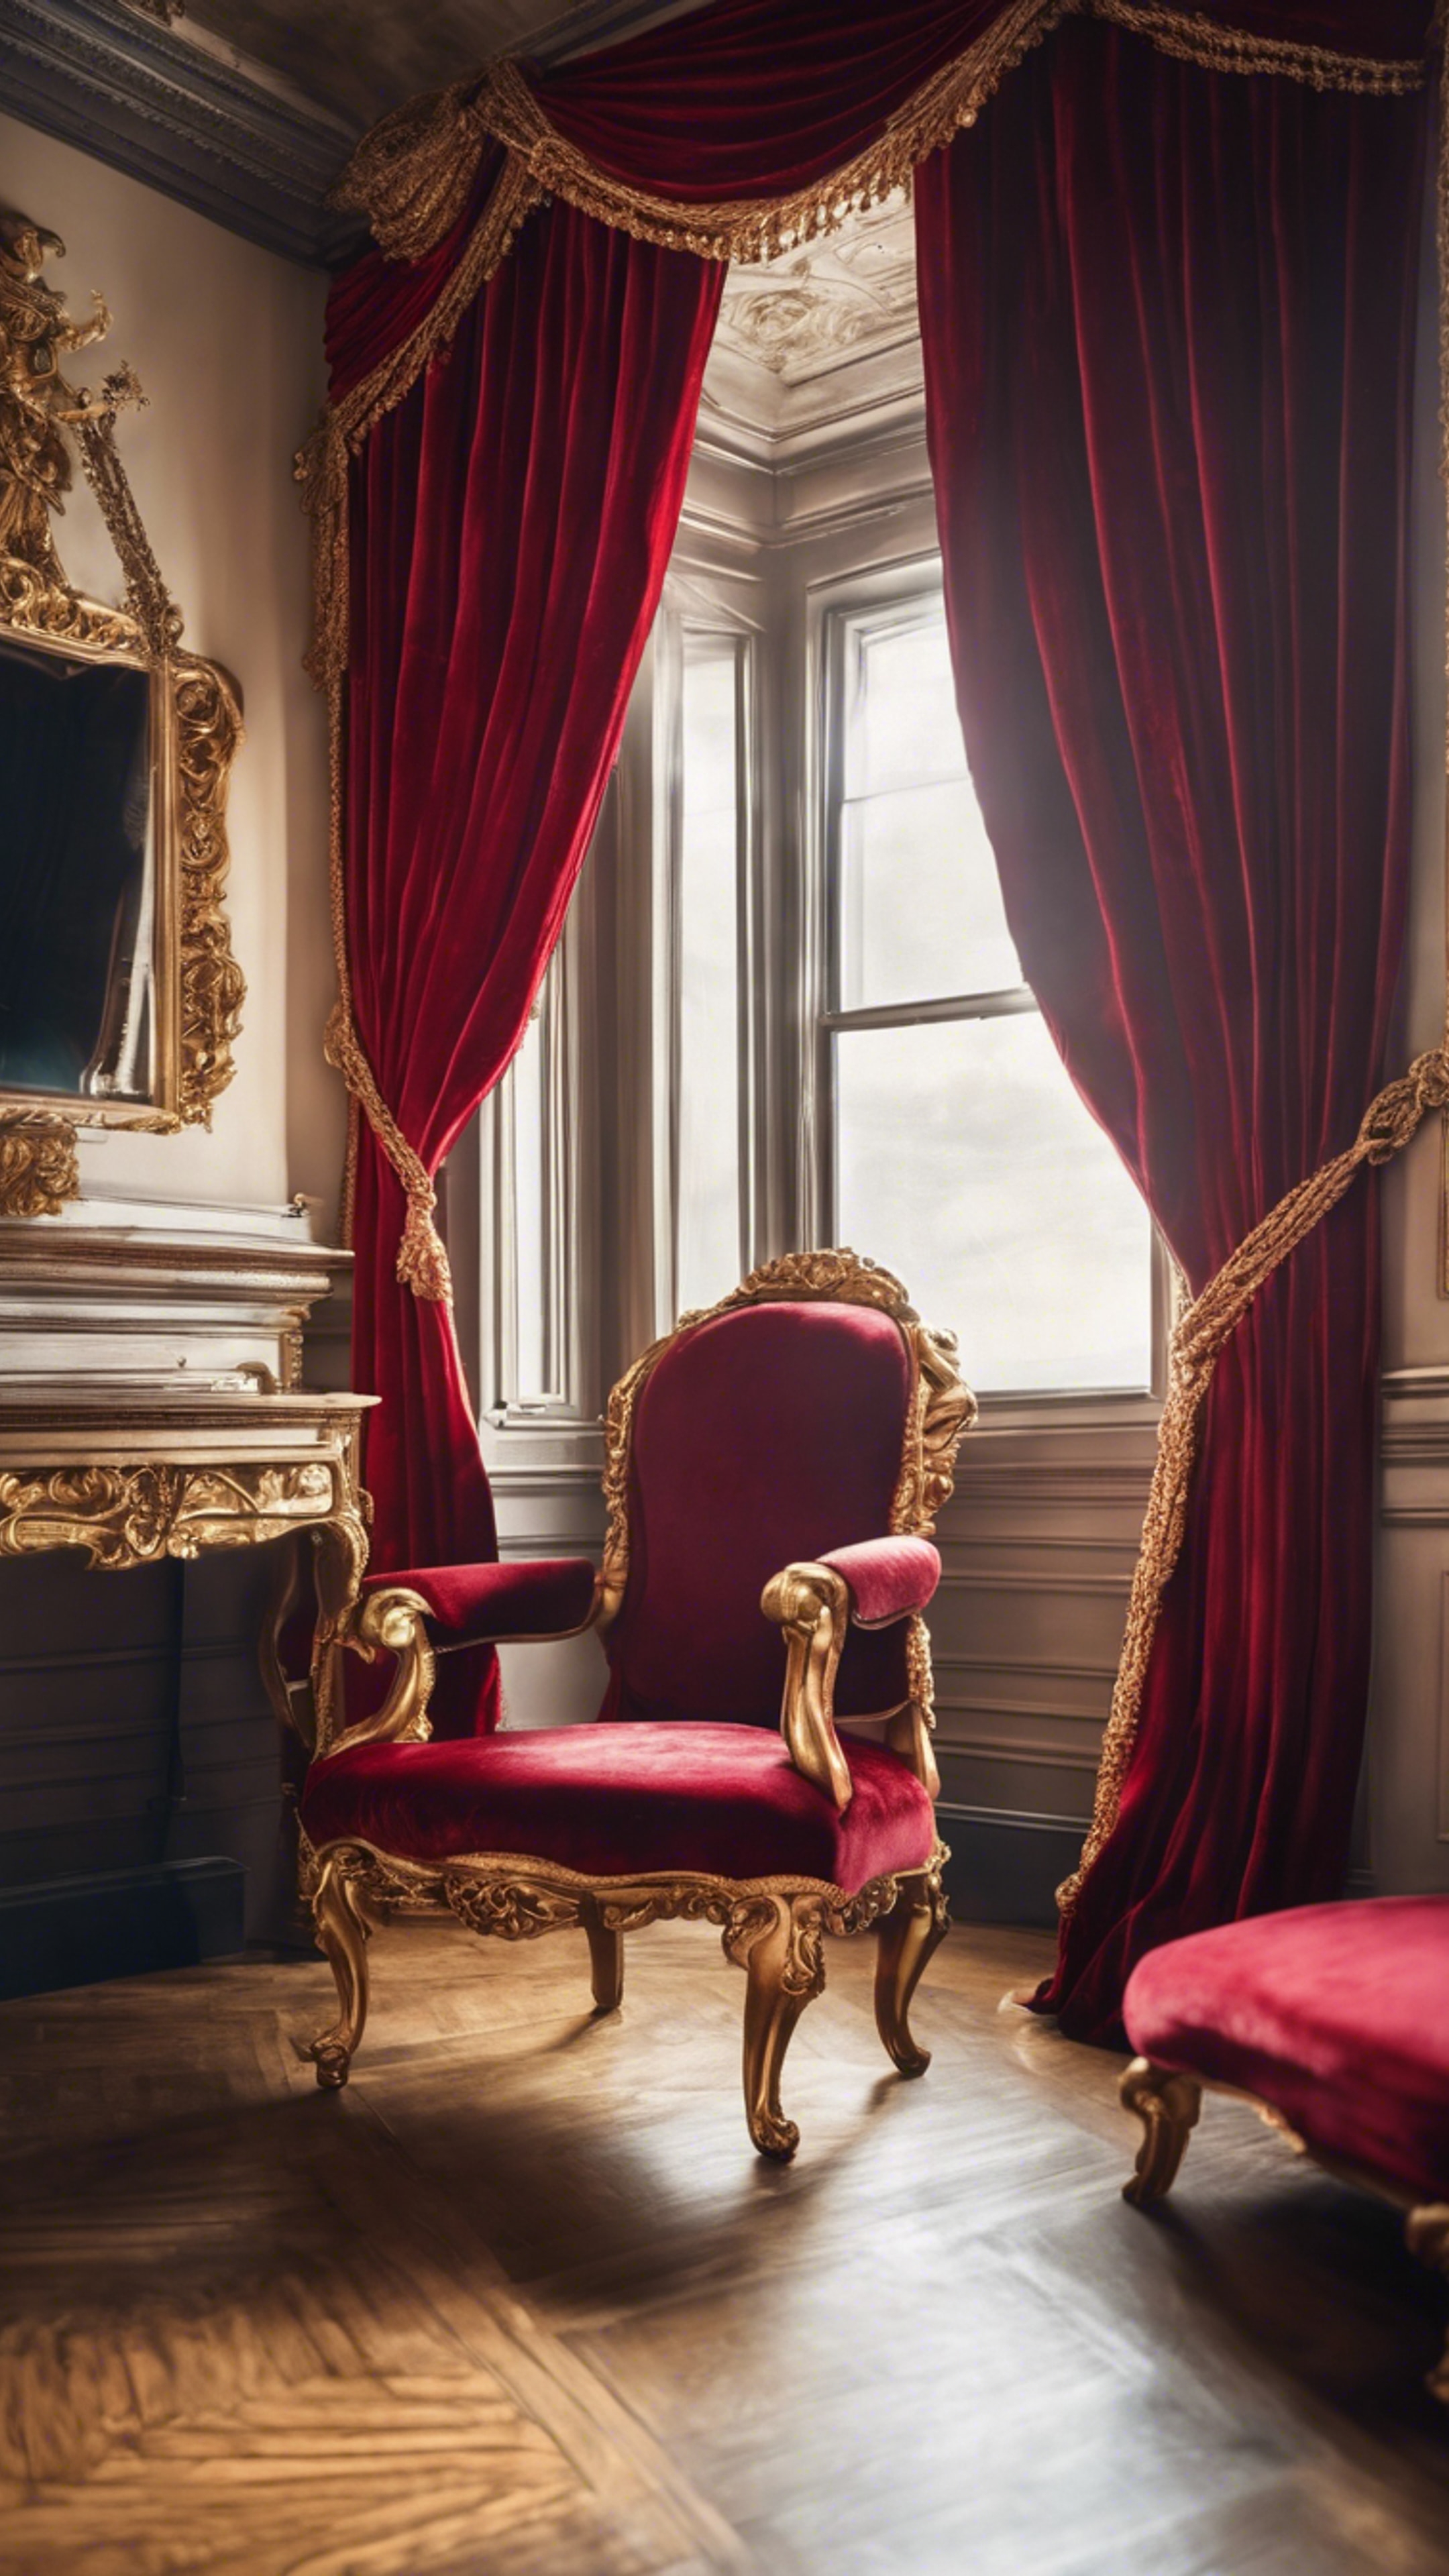 Red velvet drapes tied back with gold ropes in a grand victorian-style living room.壁紙[6c8dd2a9b4f74c0eb869]